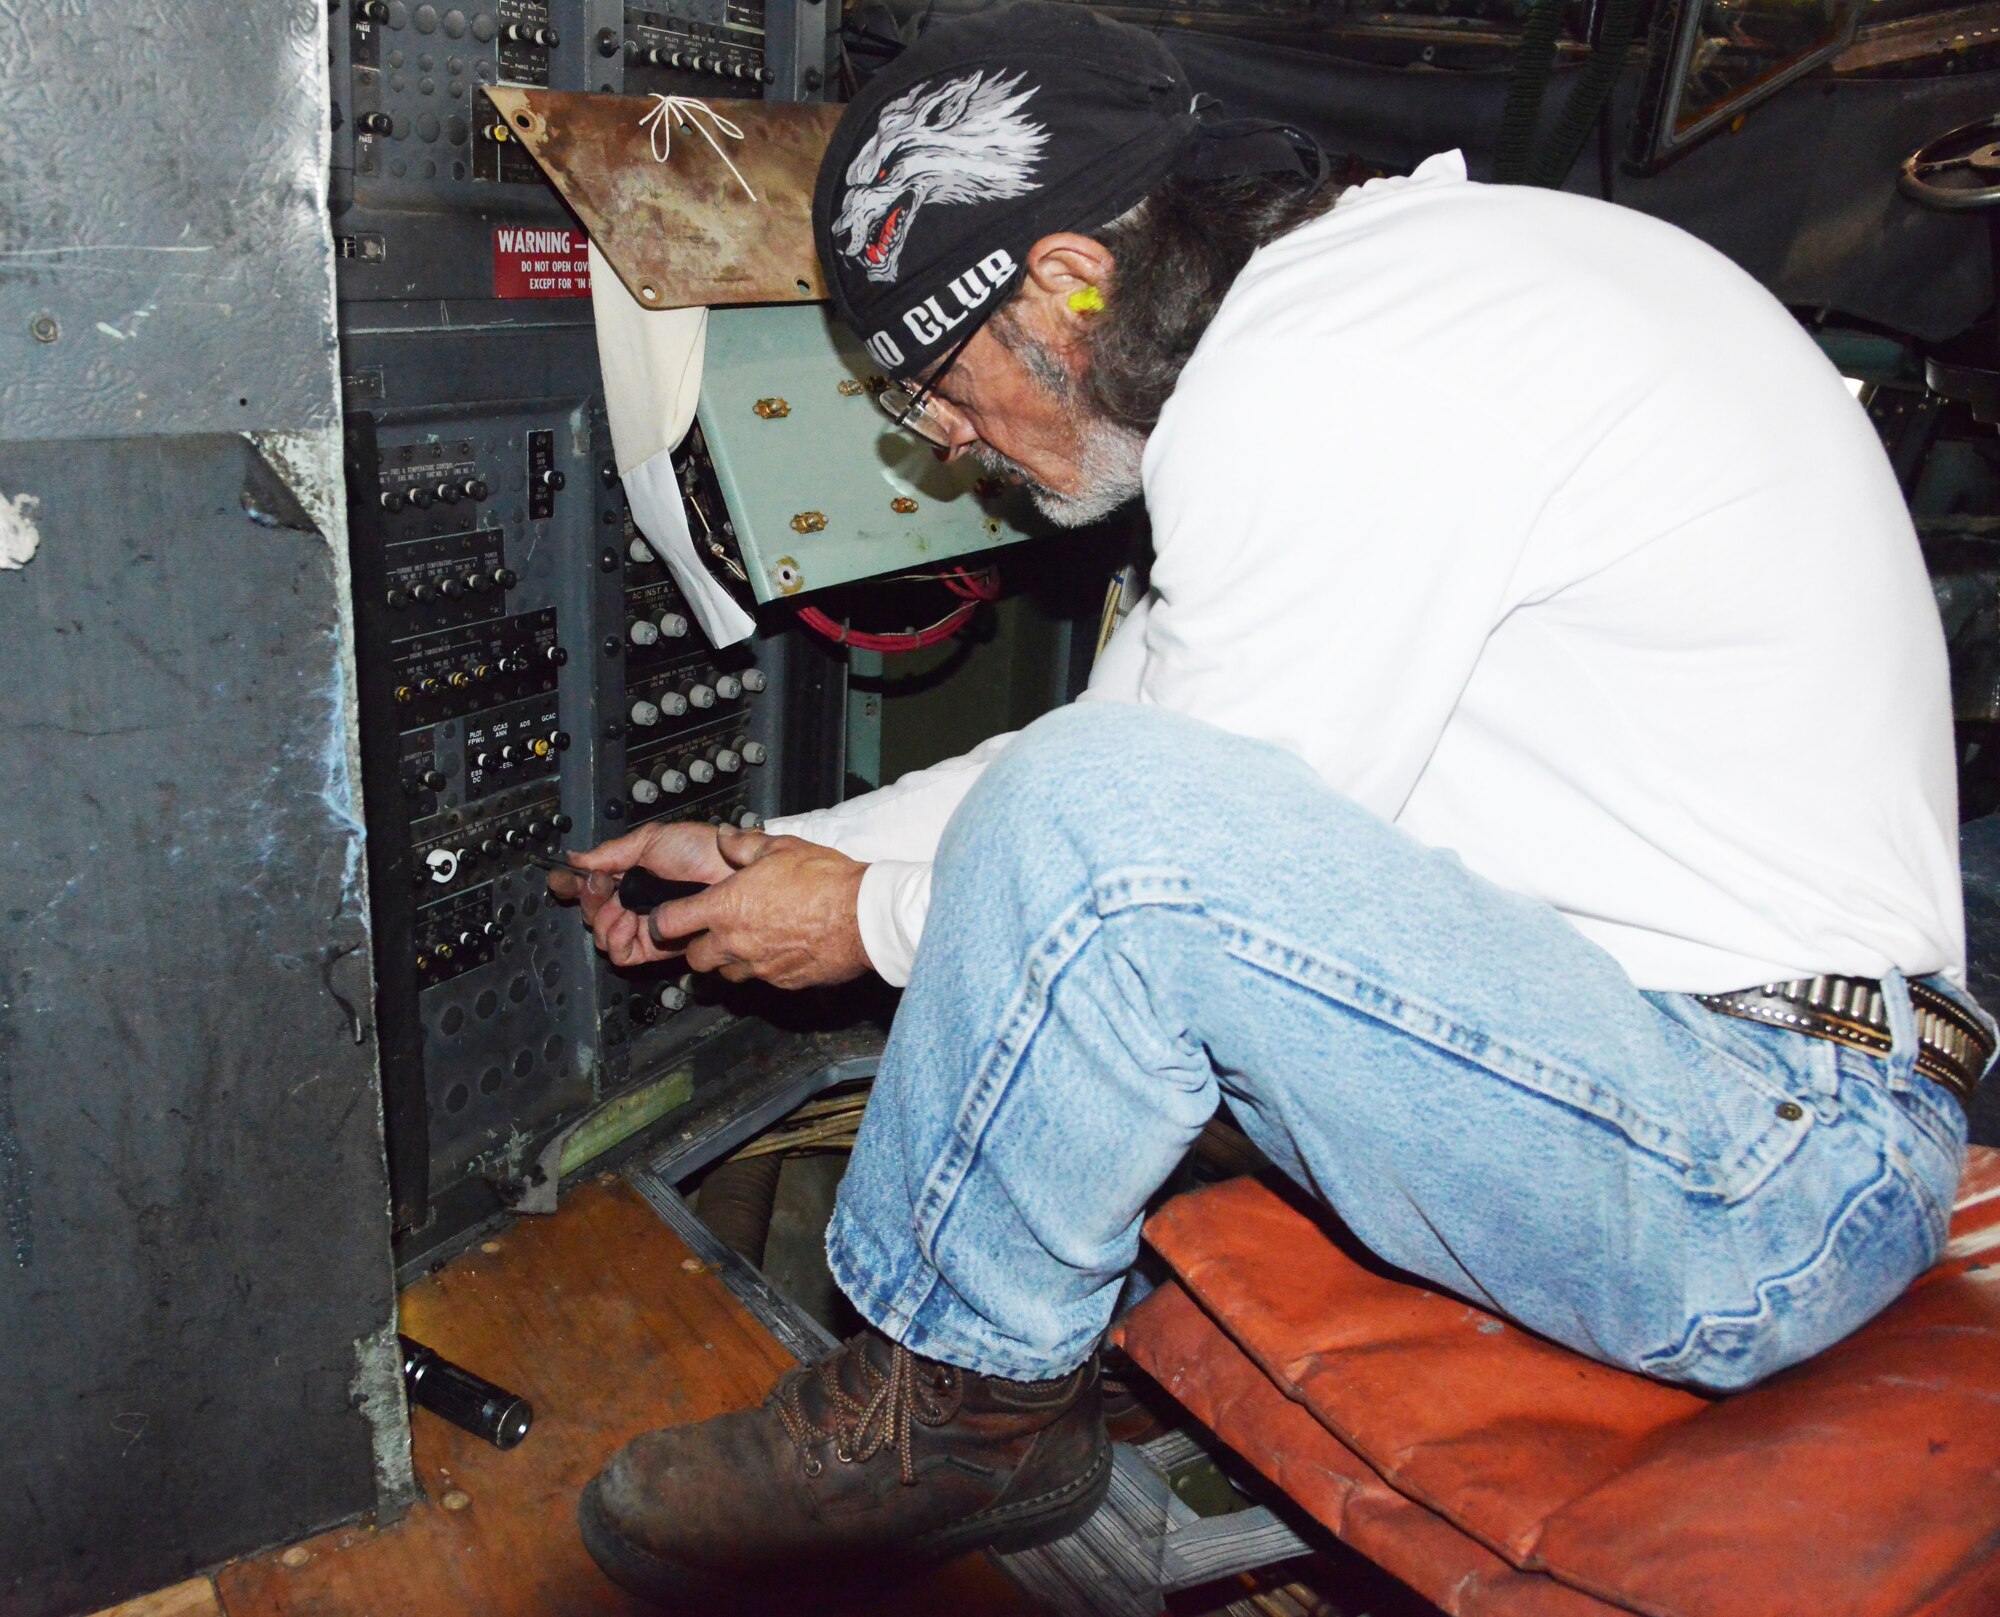 Rusty Painter, 560th Aircraft Maintenance Squadron aircraft electrician, cleans corrosion from a circuit breaker faceplate to ensure aircrews are able to read it when needed. (U.S. Air Force photo by Ray Crayton)